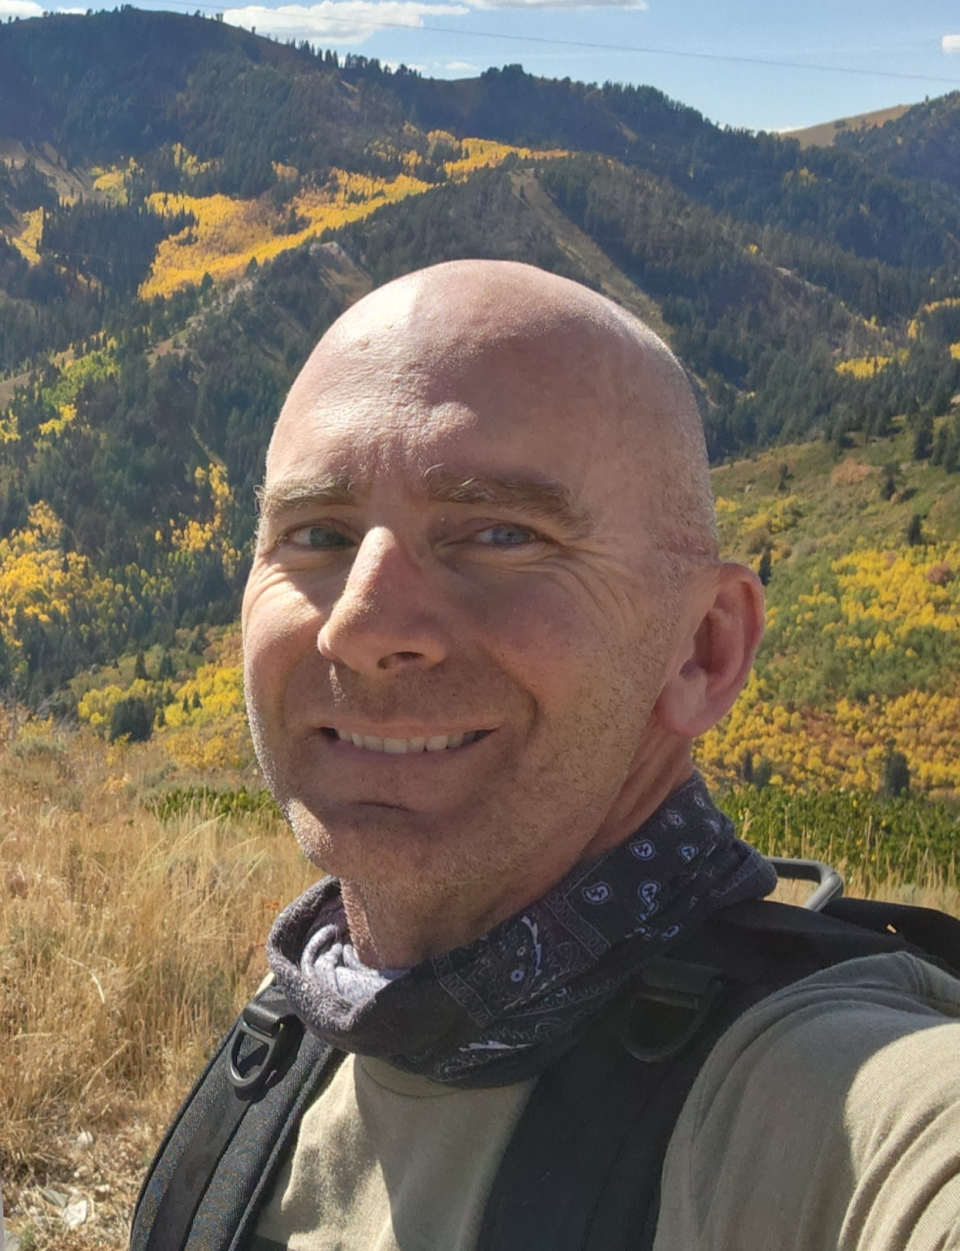 Jason Curry has been named the new director of the Utah Division of Outdoor Recreation, a state agency that guides what has grown into a $6 billion industry in the state.